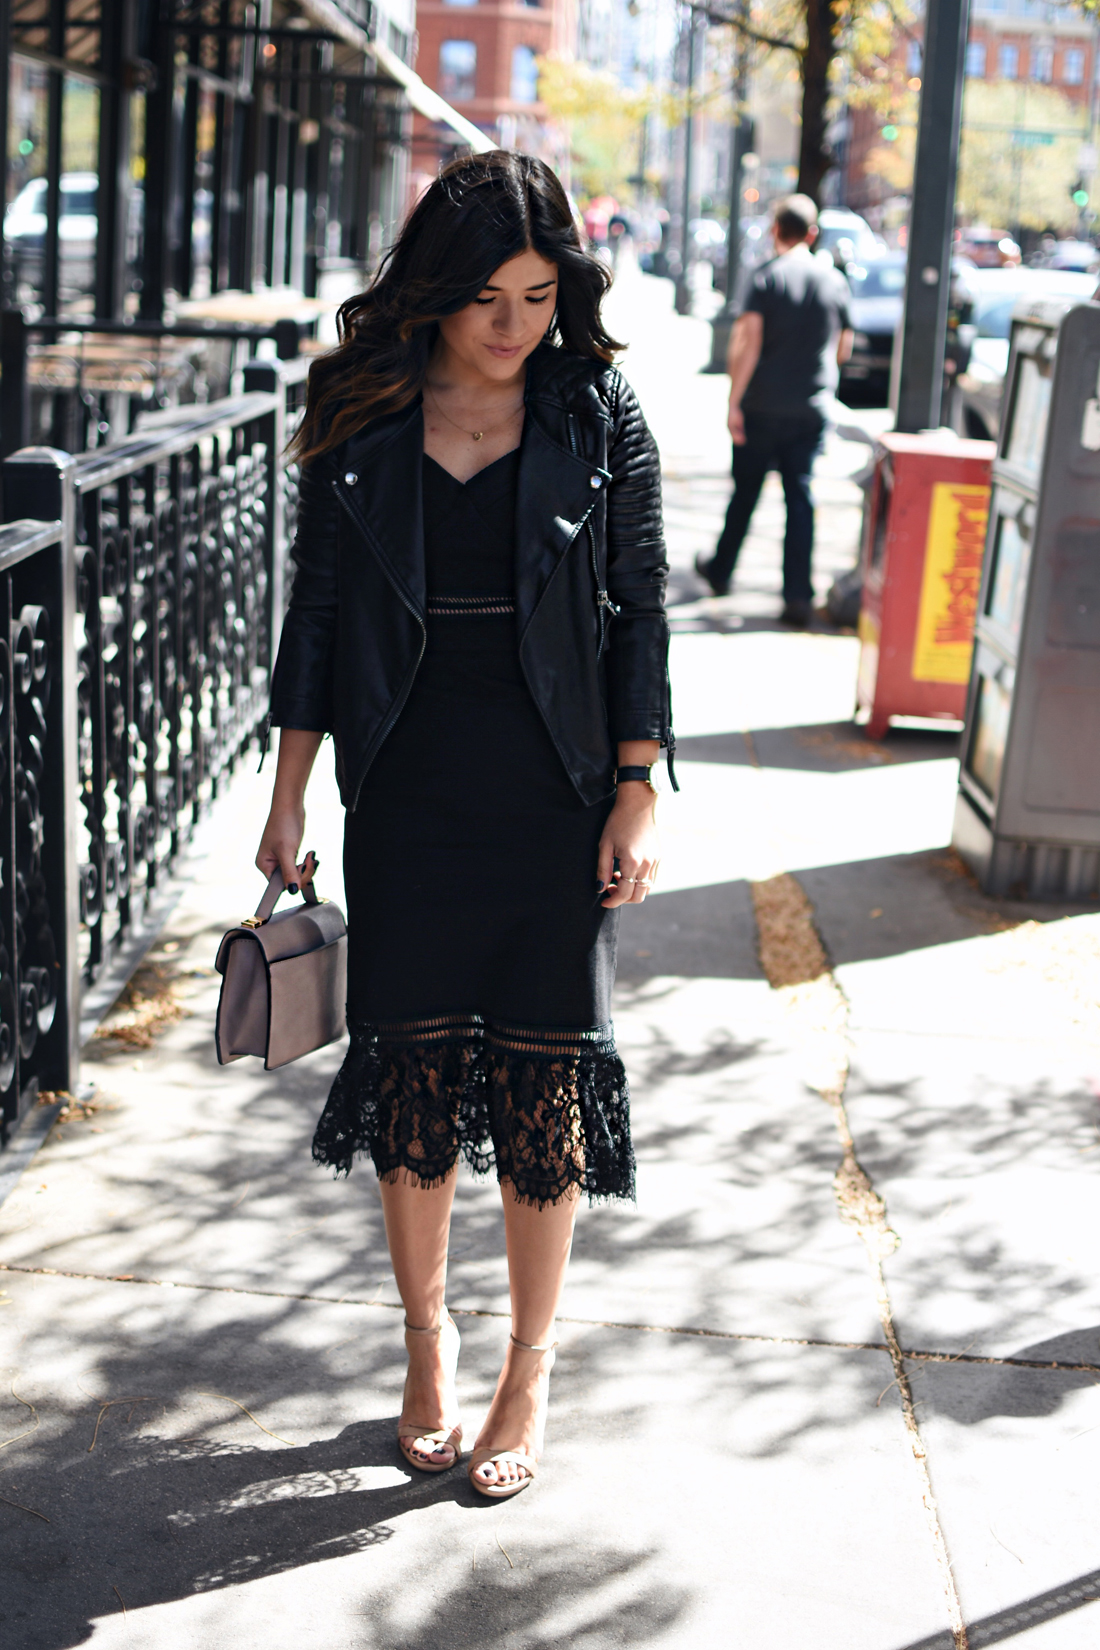 Carolina Hellal of Chic Talk wearing a Chicwish black lace dress, Topshop faux leather jacket, Mellow World bag and Steve Madden nude sandals